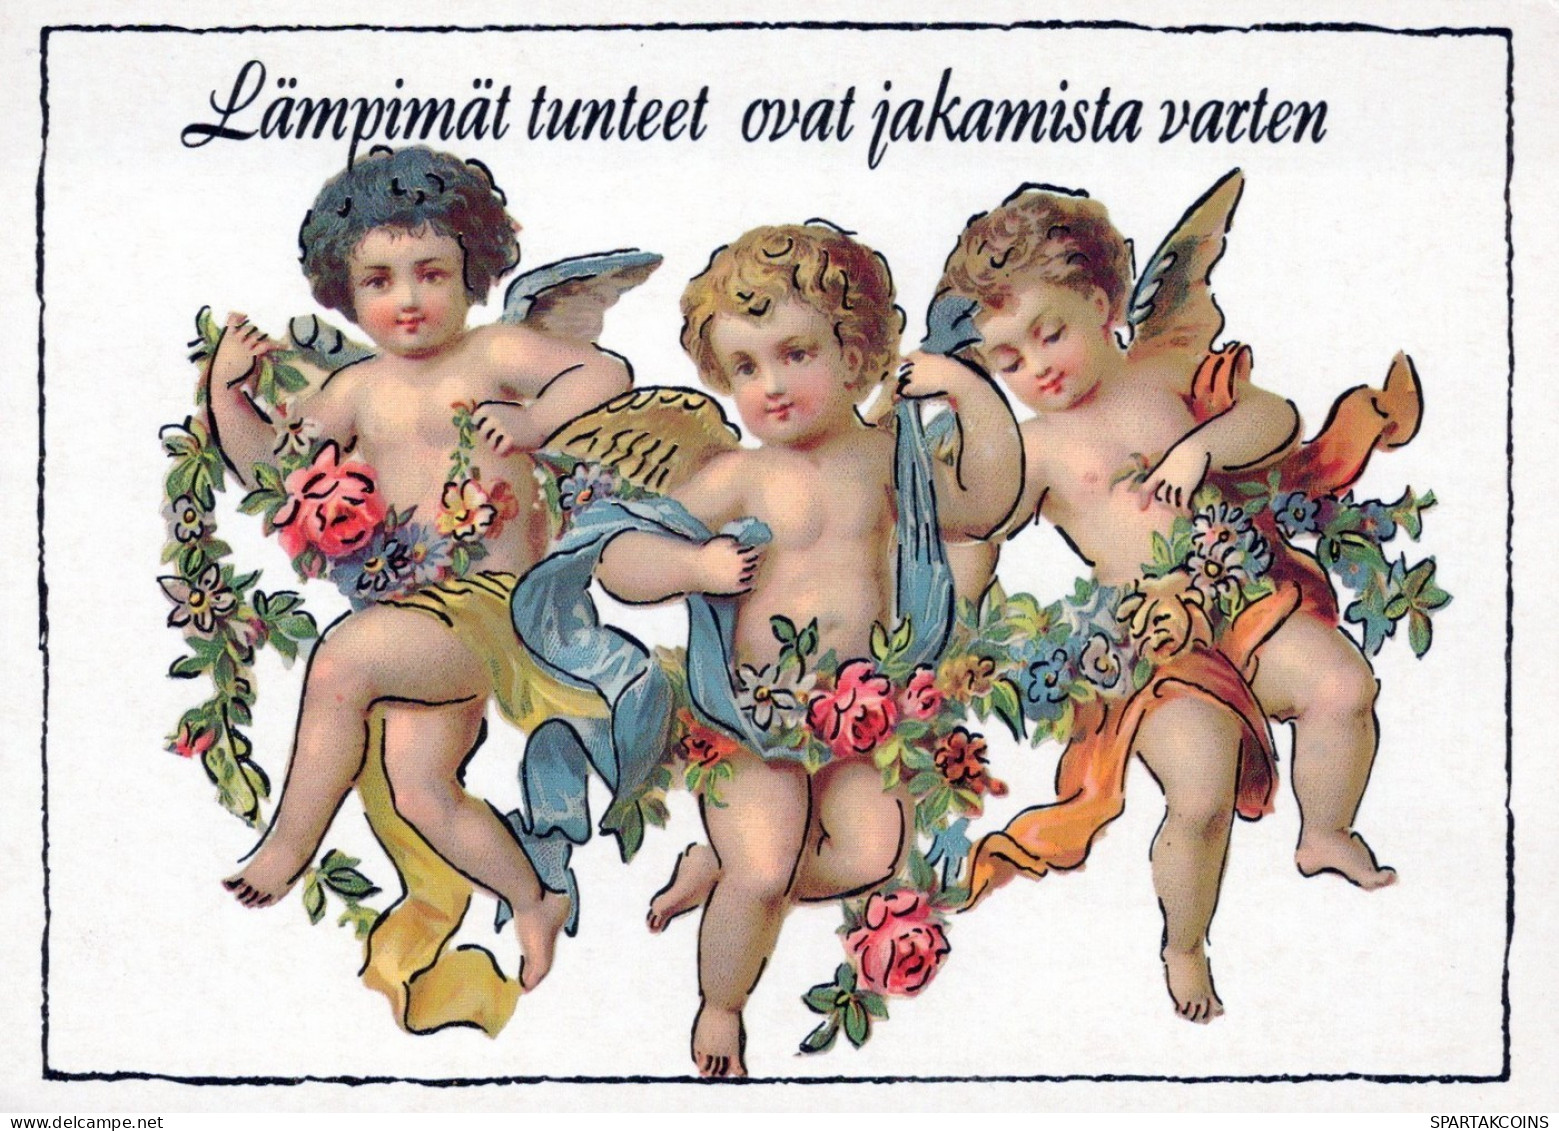 ANGELO Buon Anno Natale Vintage Cartolina CPSM #PAH331.IT - Angels